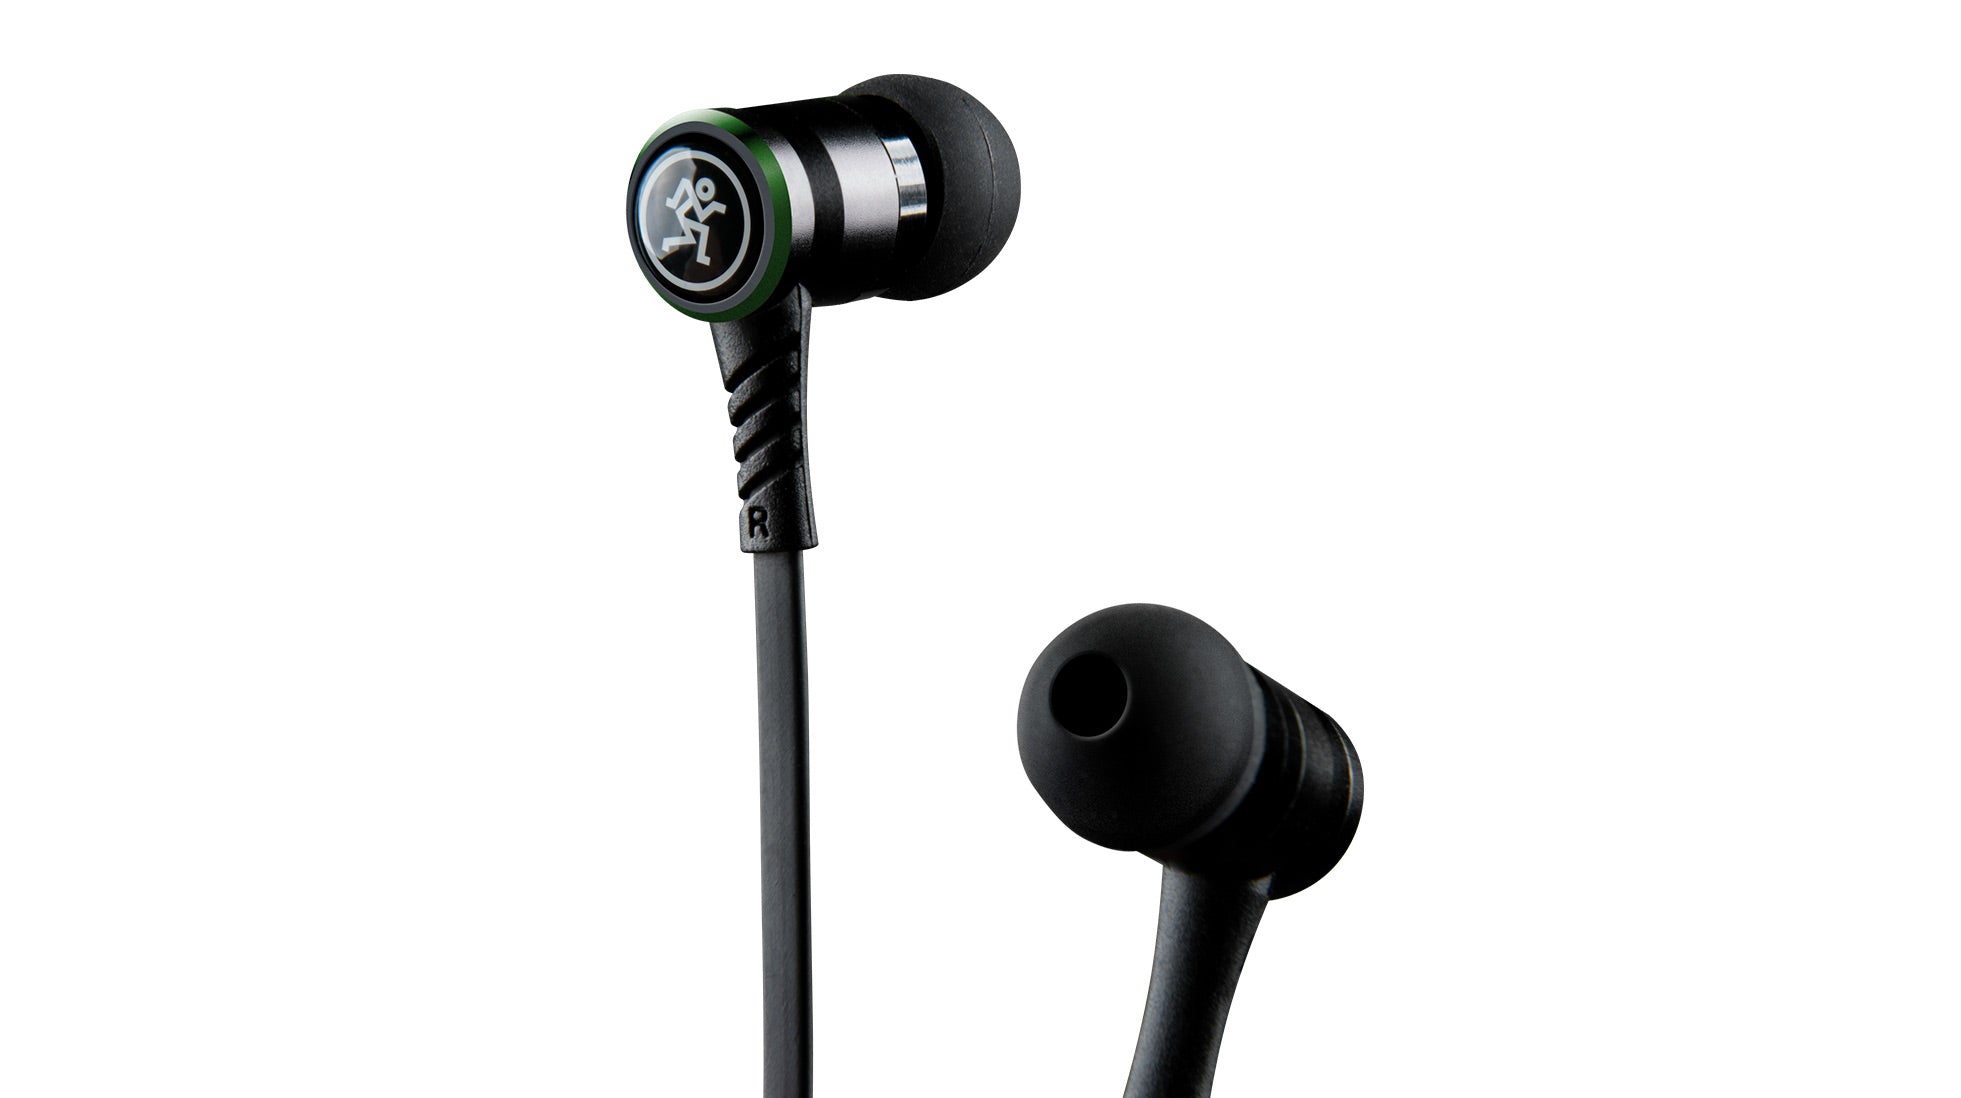 Mackie CR-Buds - High Performance Earbuds with Mic & Control